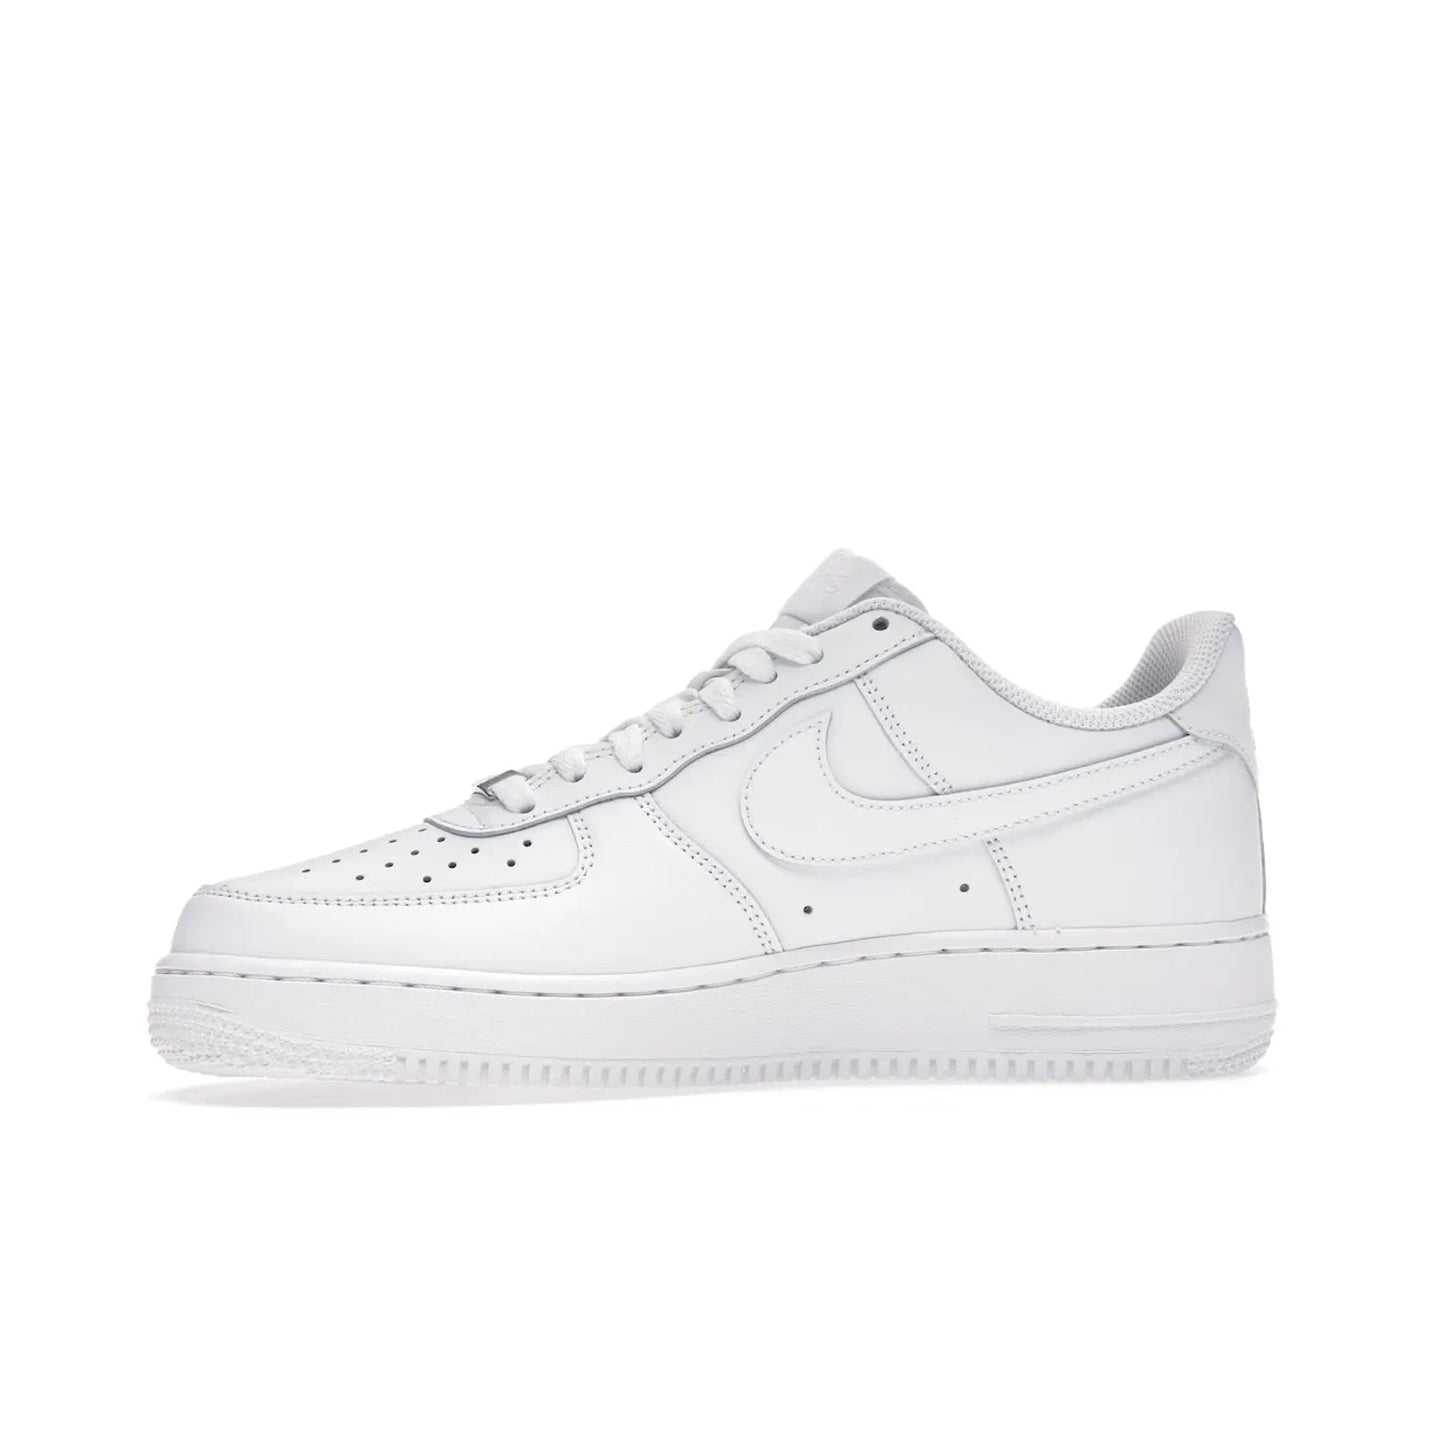 Nike Air Force 1 Low '07 White - Image 18 - Only at www.BallersClubKickz.com - ##
Iconic Swoosh overlays and crisp white sole make the classic Nike Air Force 1 Low White '07 an essential colorway. Classic for seasoned heads and new fans alike.